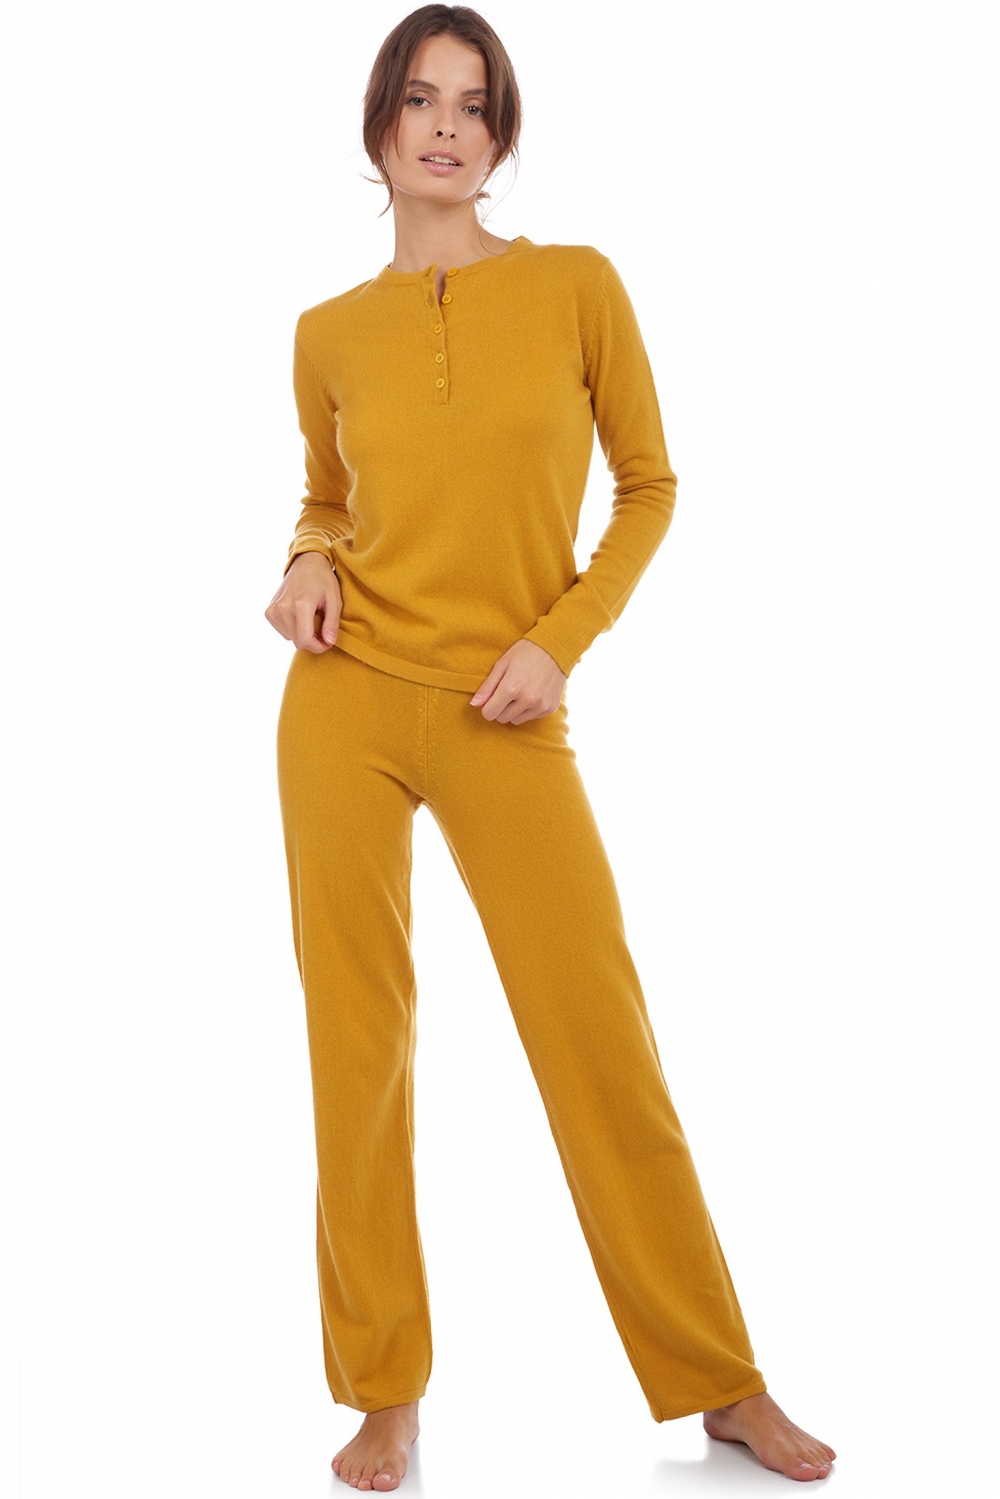 Cashmere accessories cocooning loan mustard 2xl